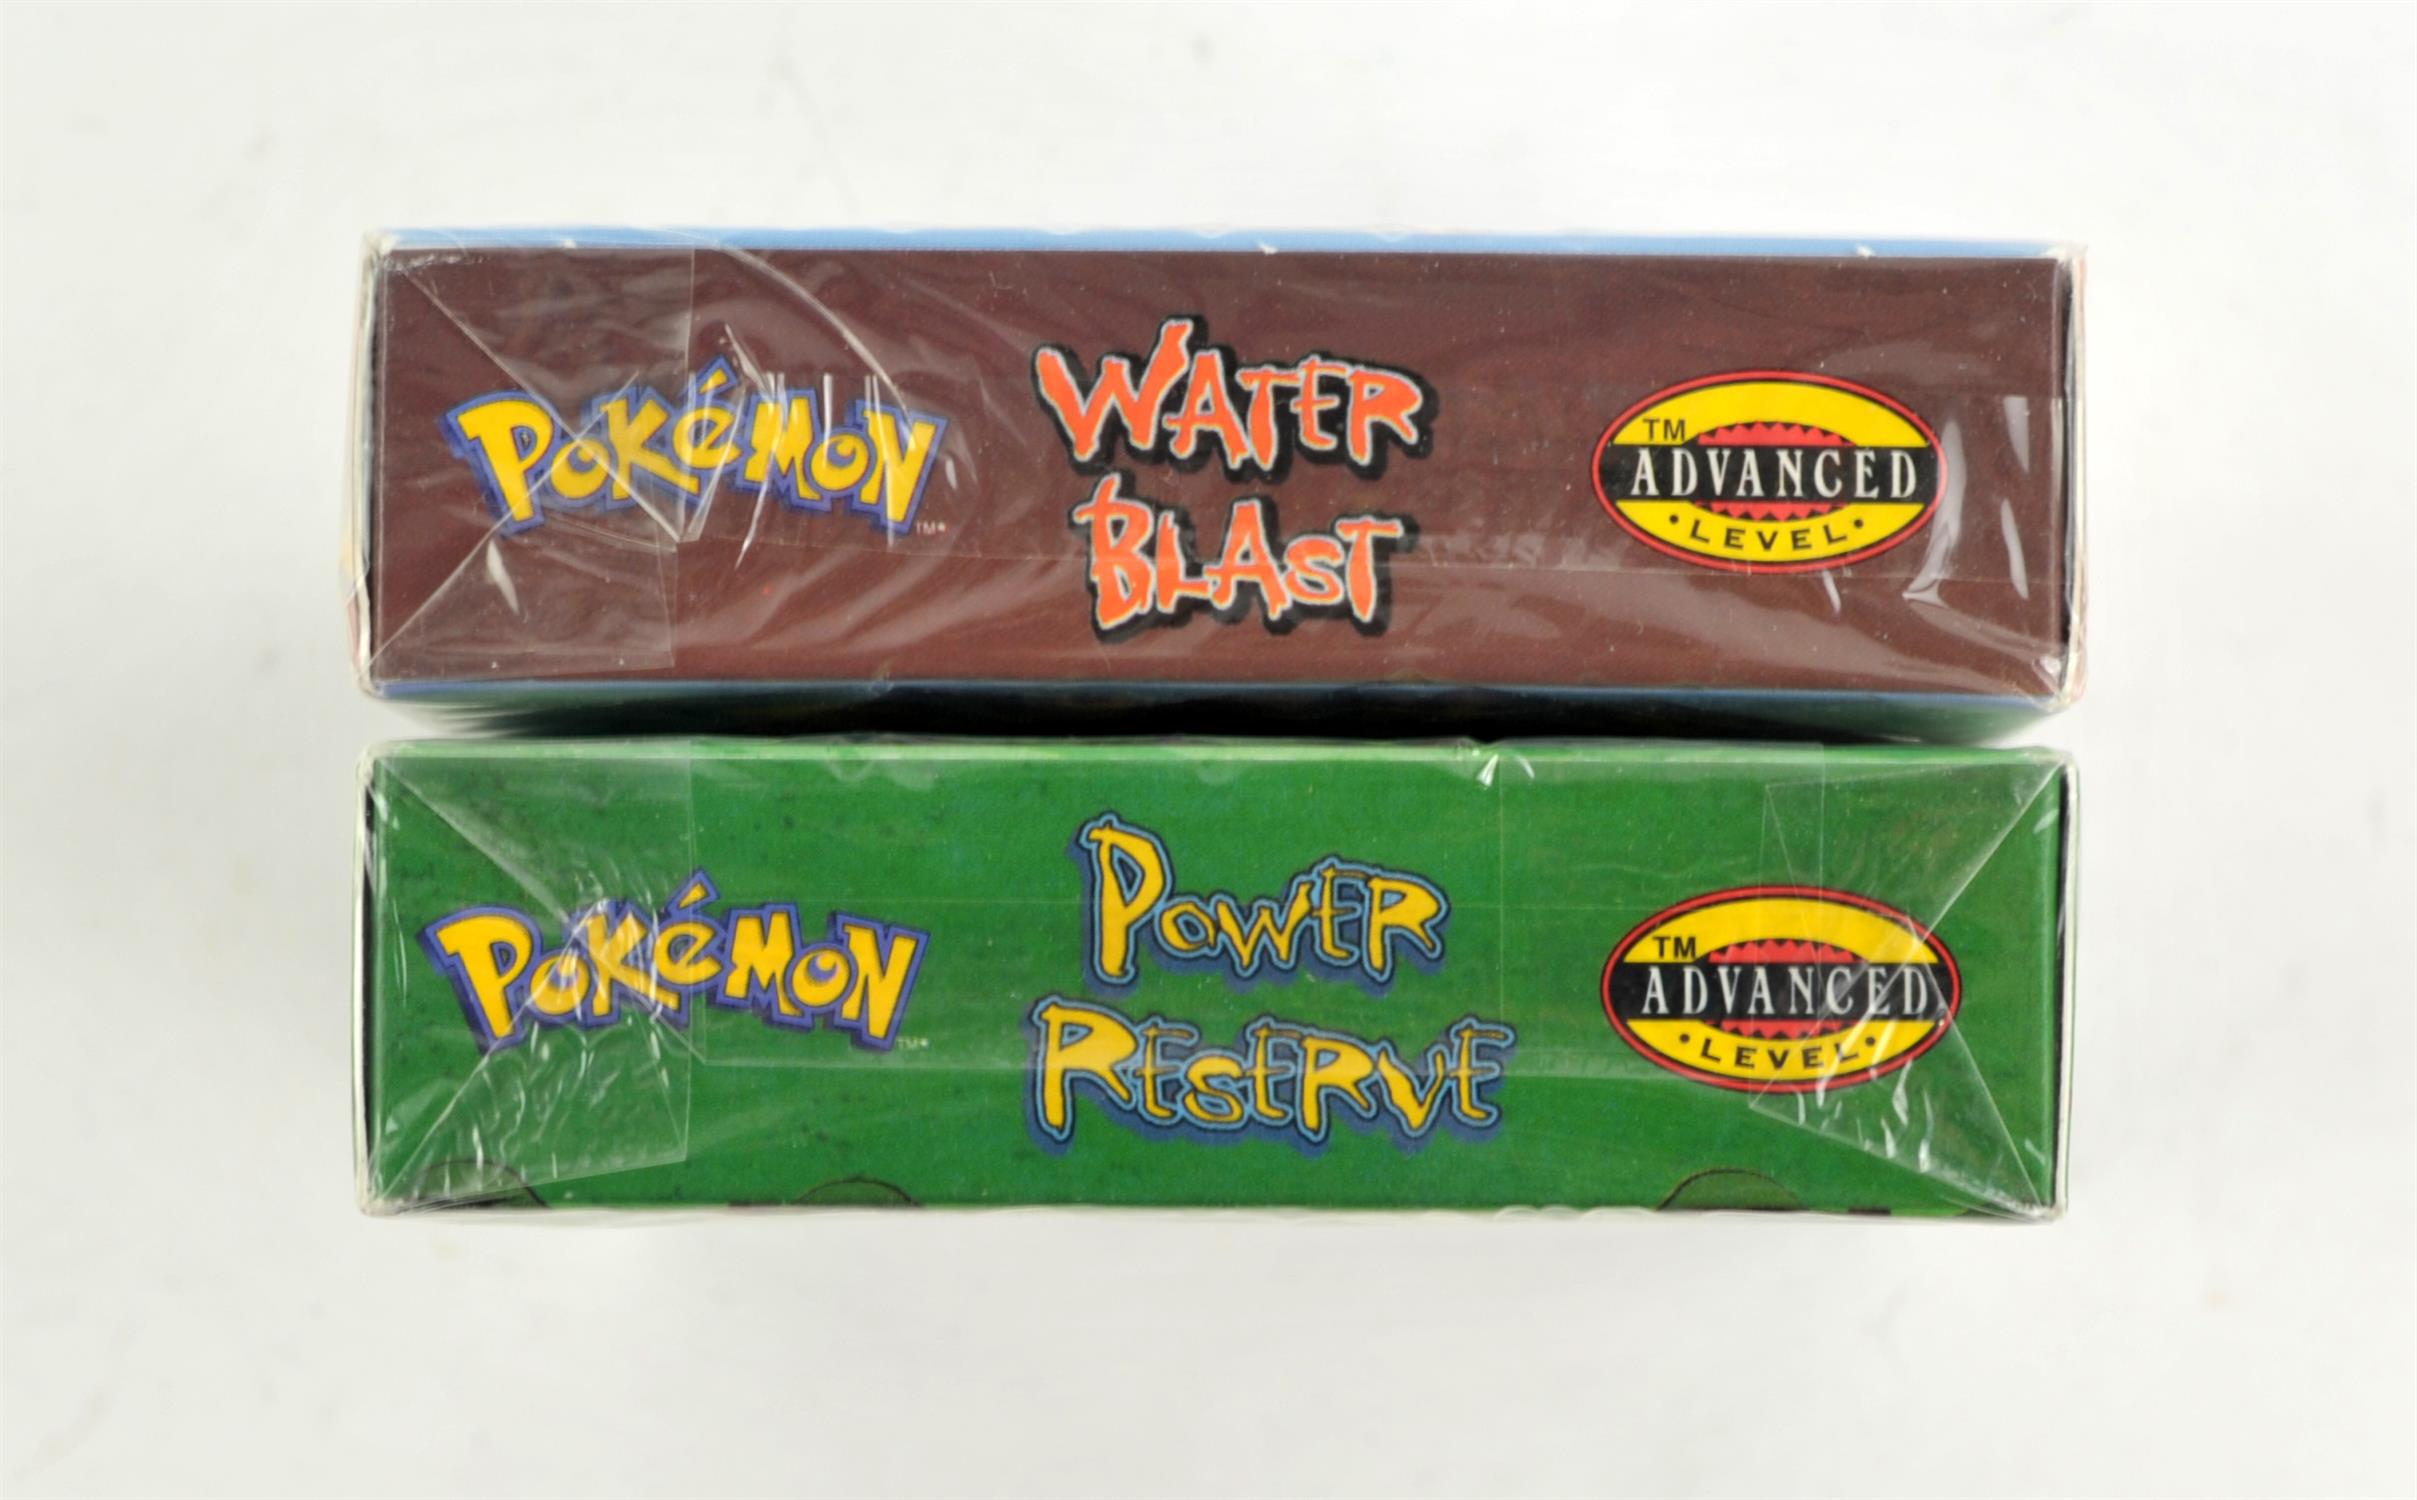 Pokemon TCG. Two Jungle Theme Decks, Sealed. Includes both Water Blast and Power Reserve. - Image 5 of 6